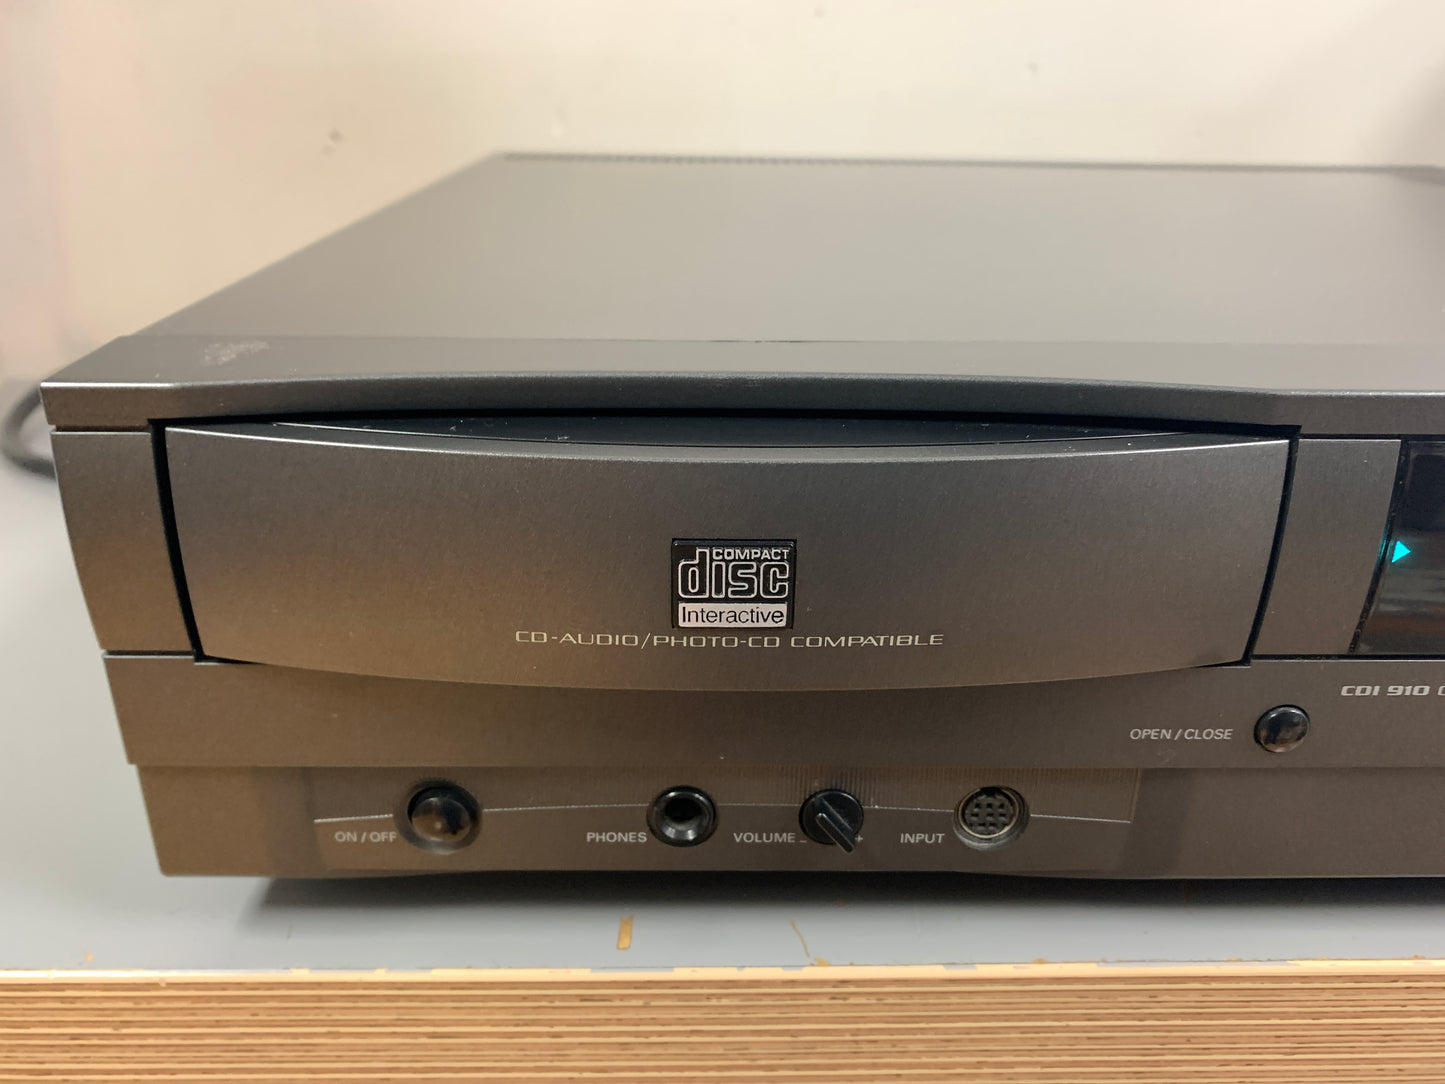 Philips CDI 910 Compact Disc Interactive Player Bundle